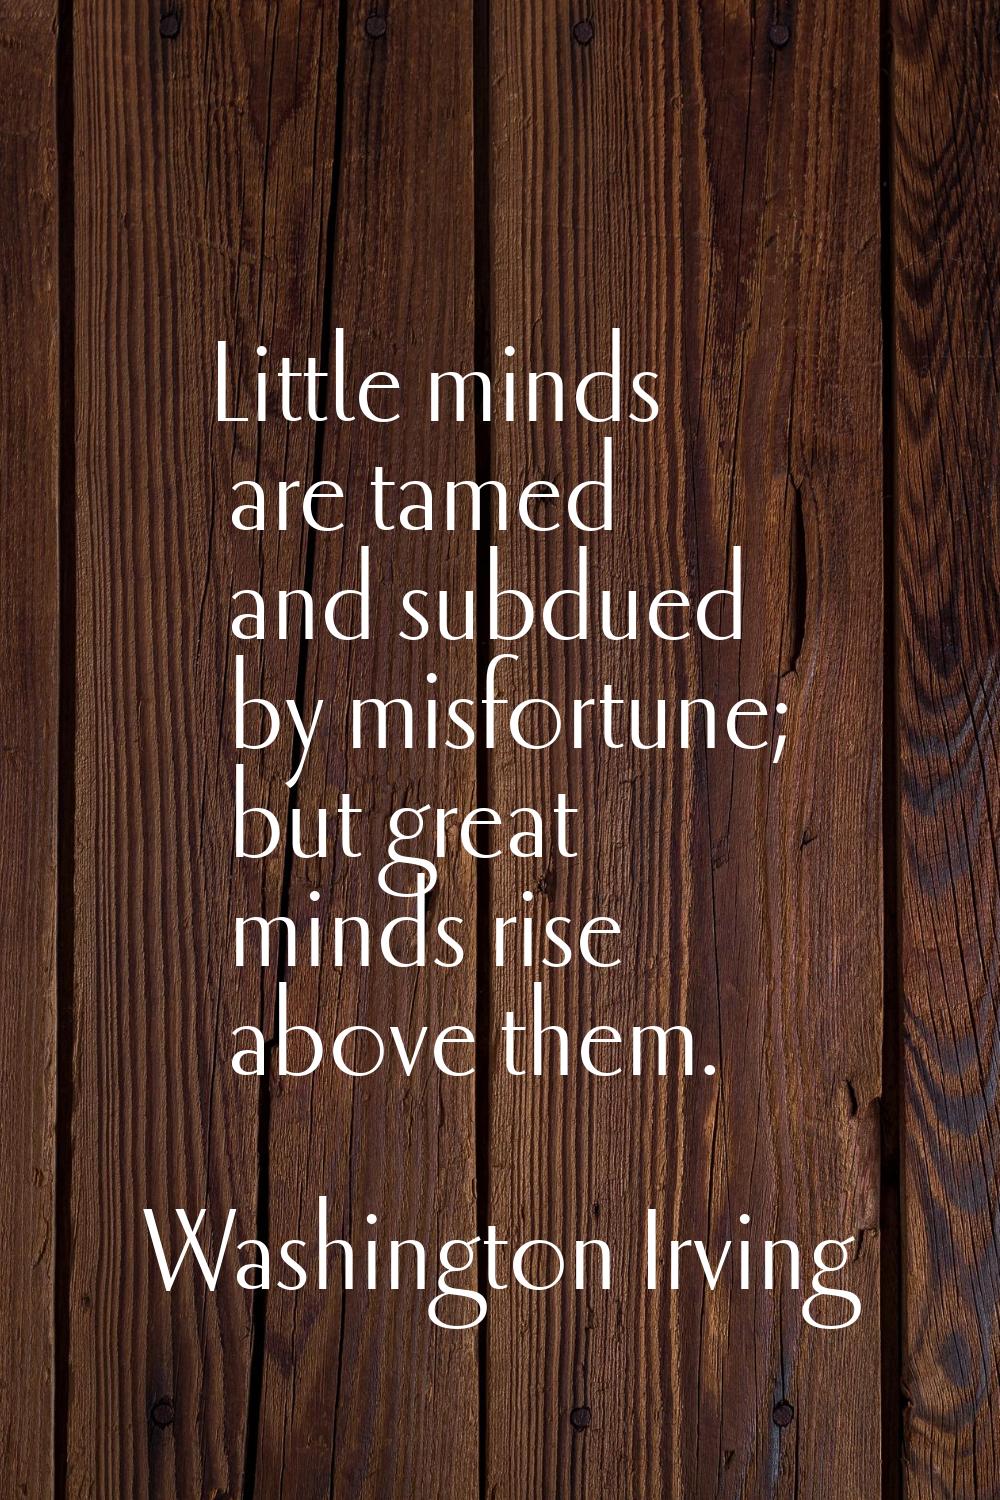 Little minds are tamed and subdued by misfortune; but great minds rise above them.